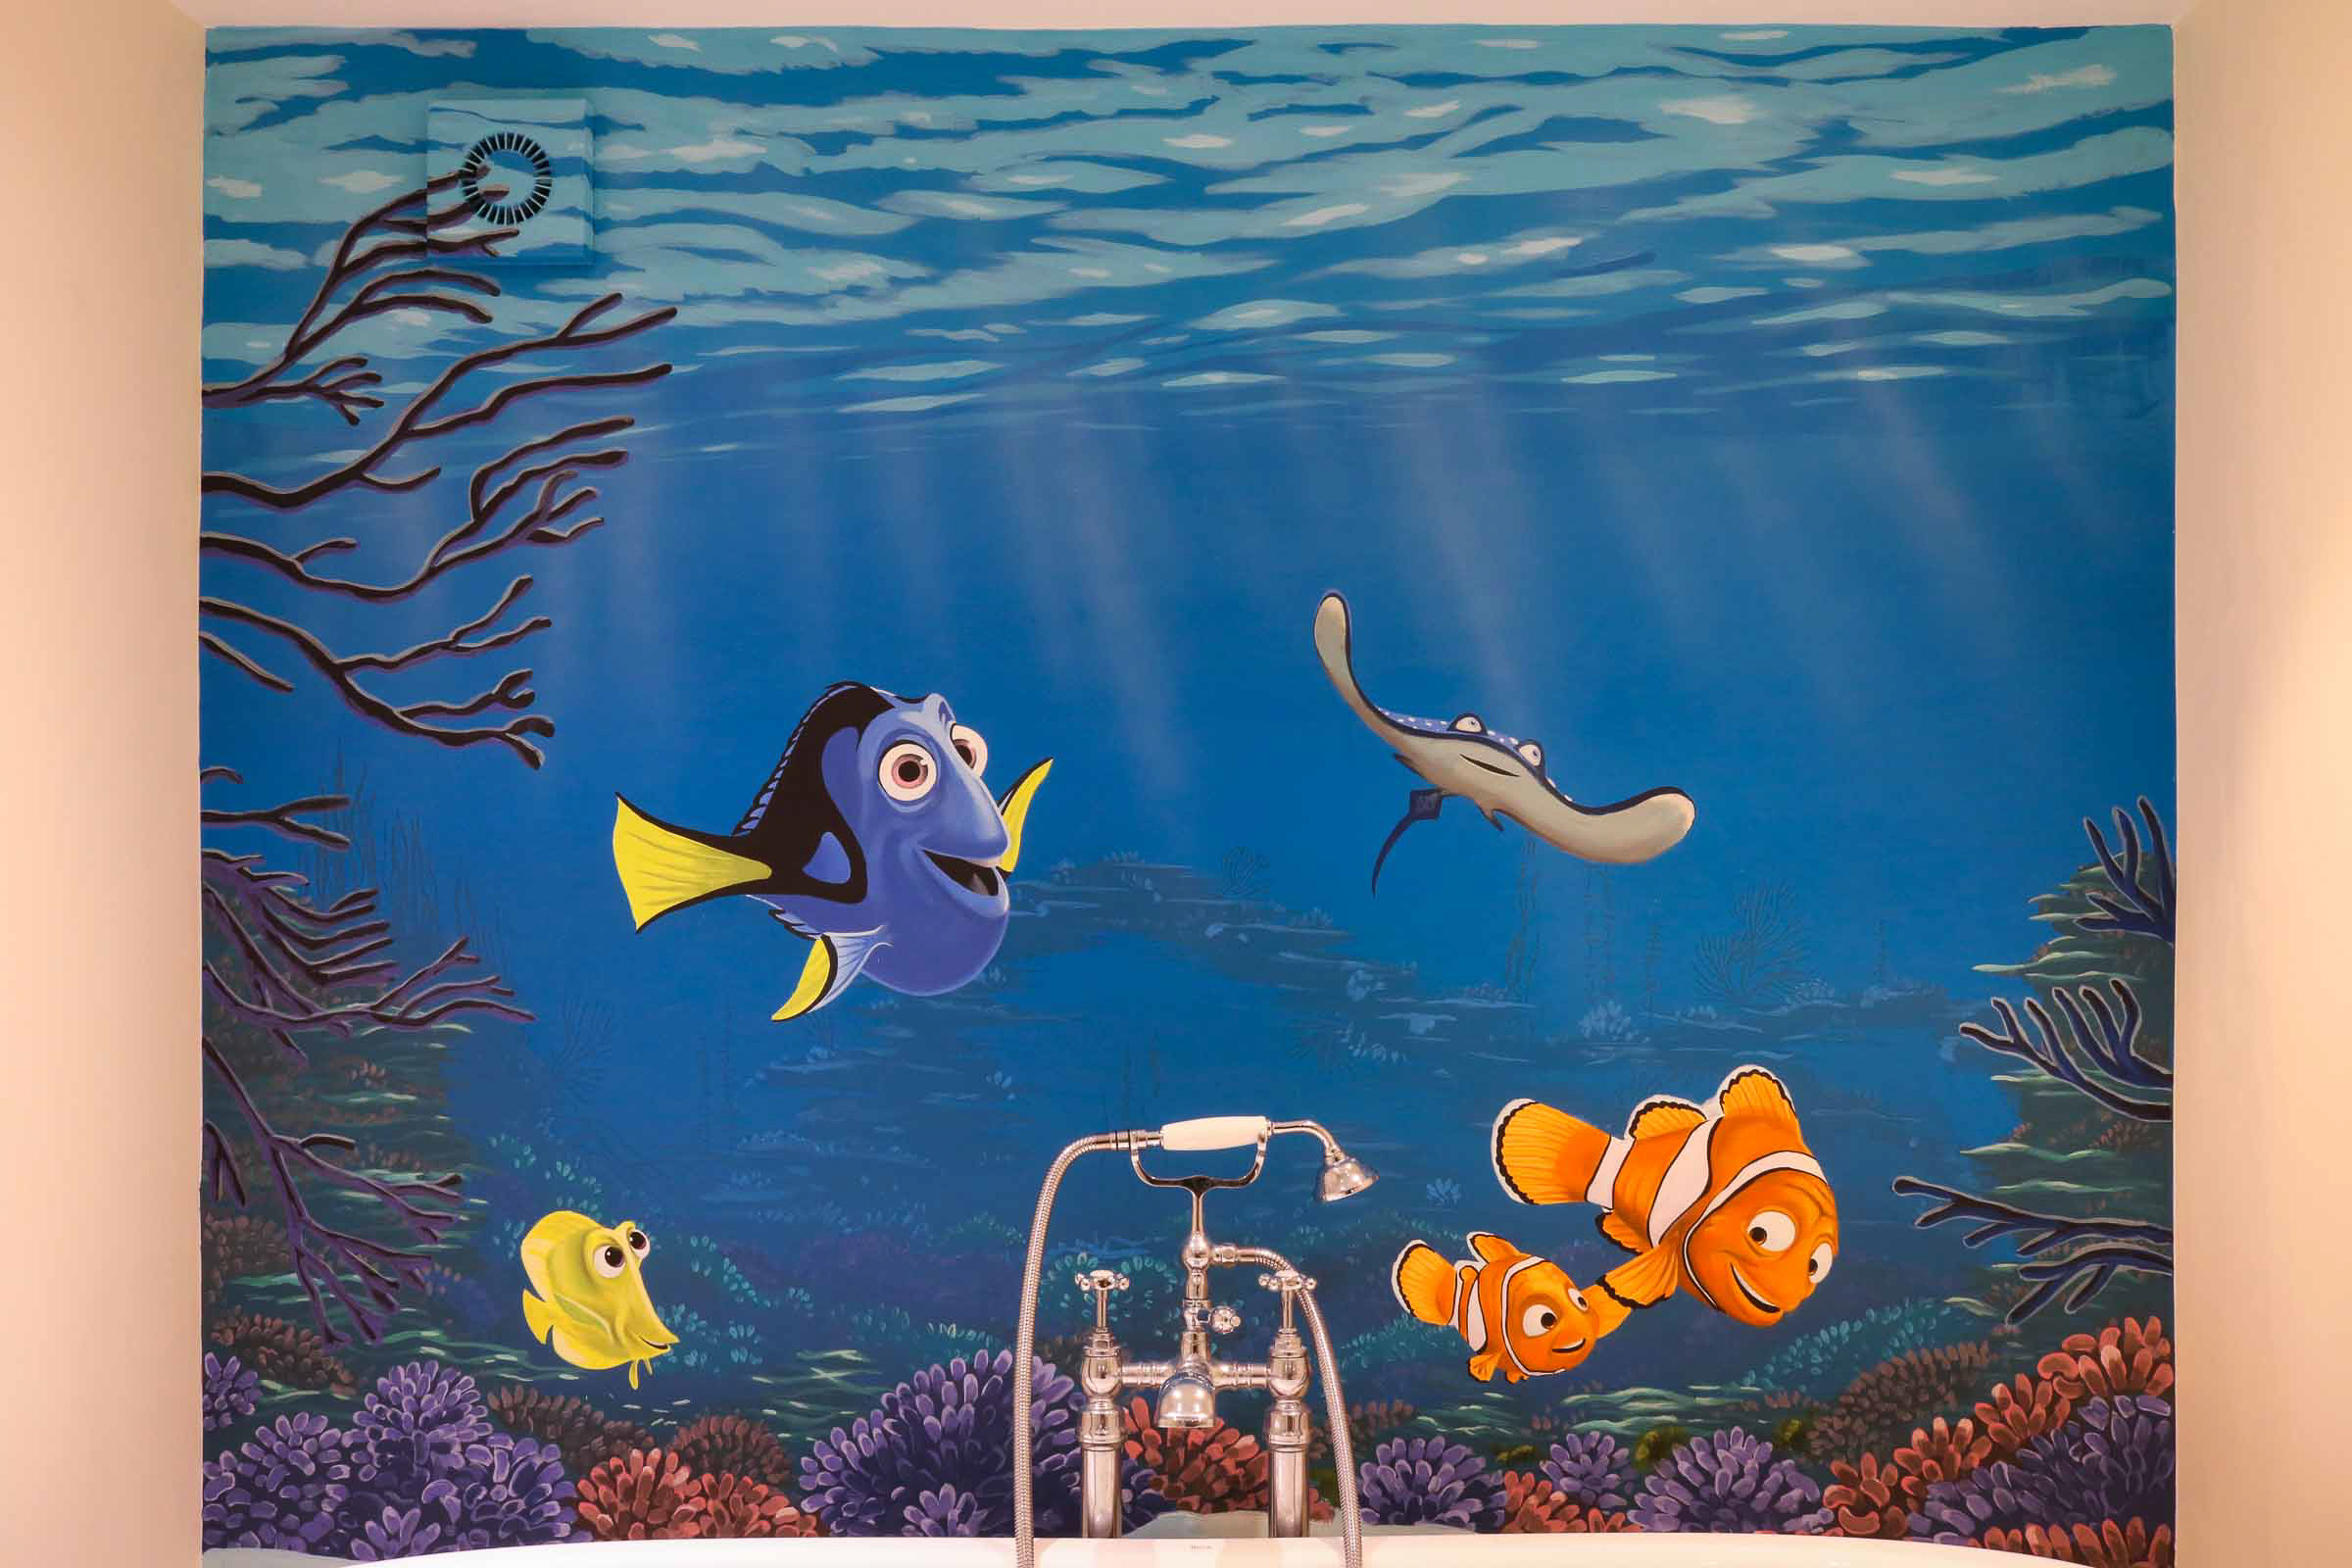 Characters and coral reef from Finding Nemo come to life in this bathroom mural